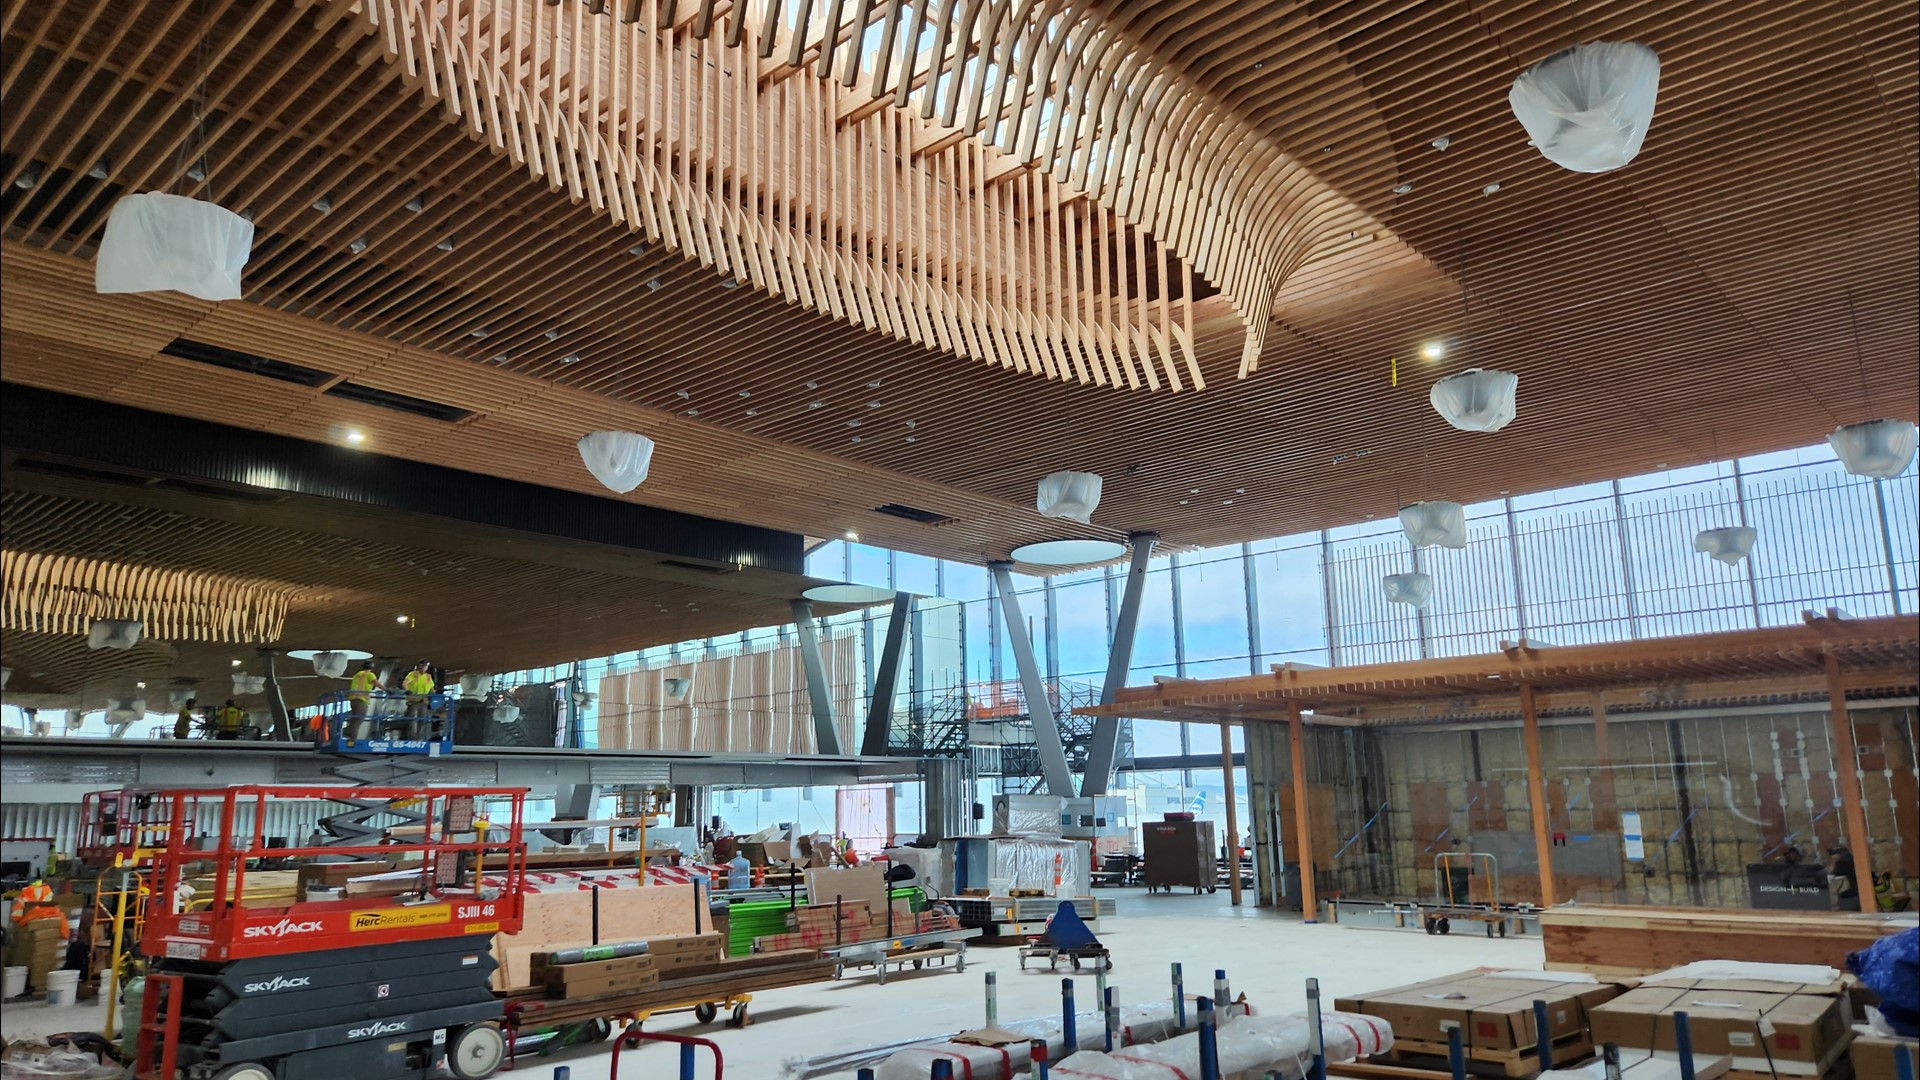 Crews are entering the home stretch of work on the new main terminal at the Portland International Airport, which is set to open in May.